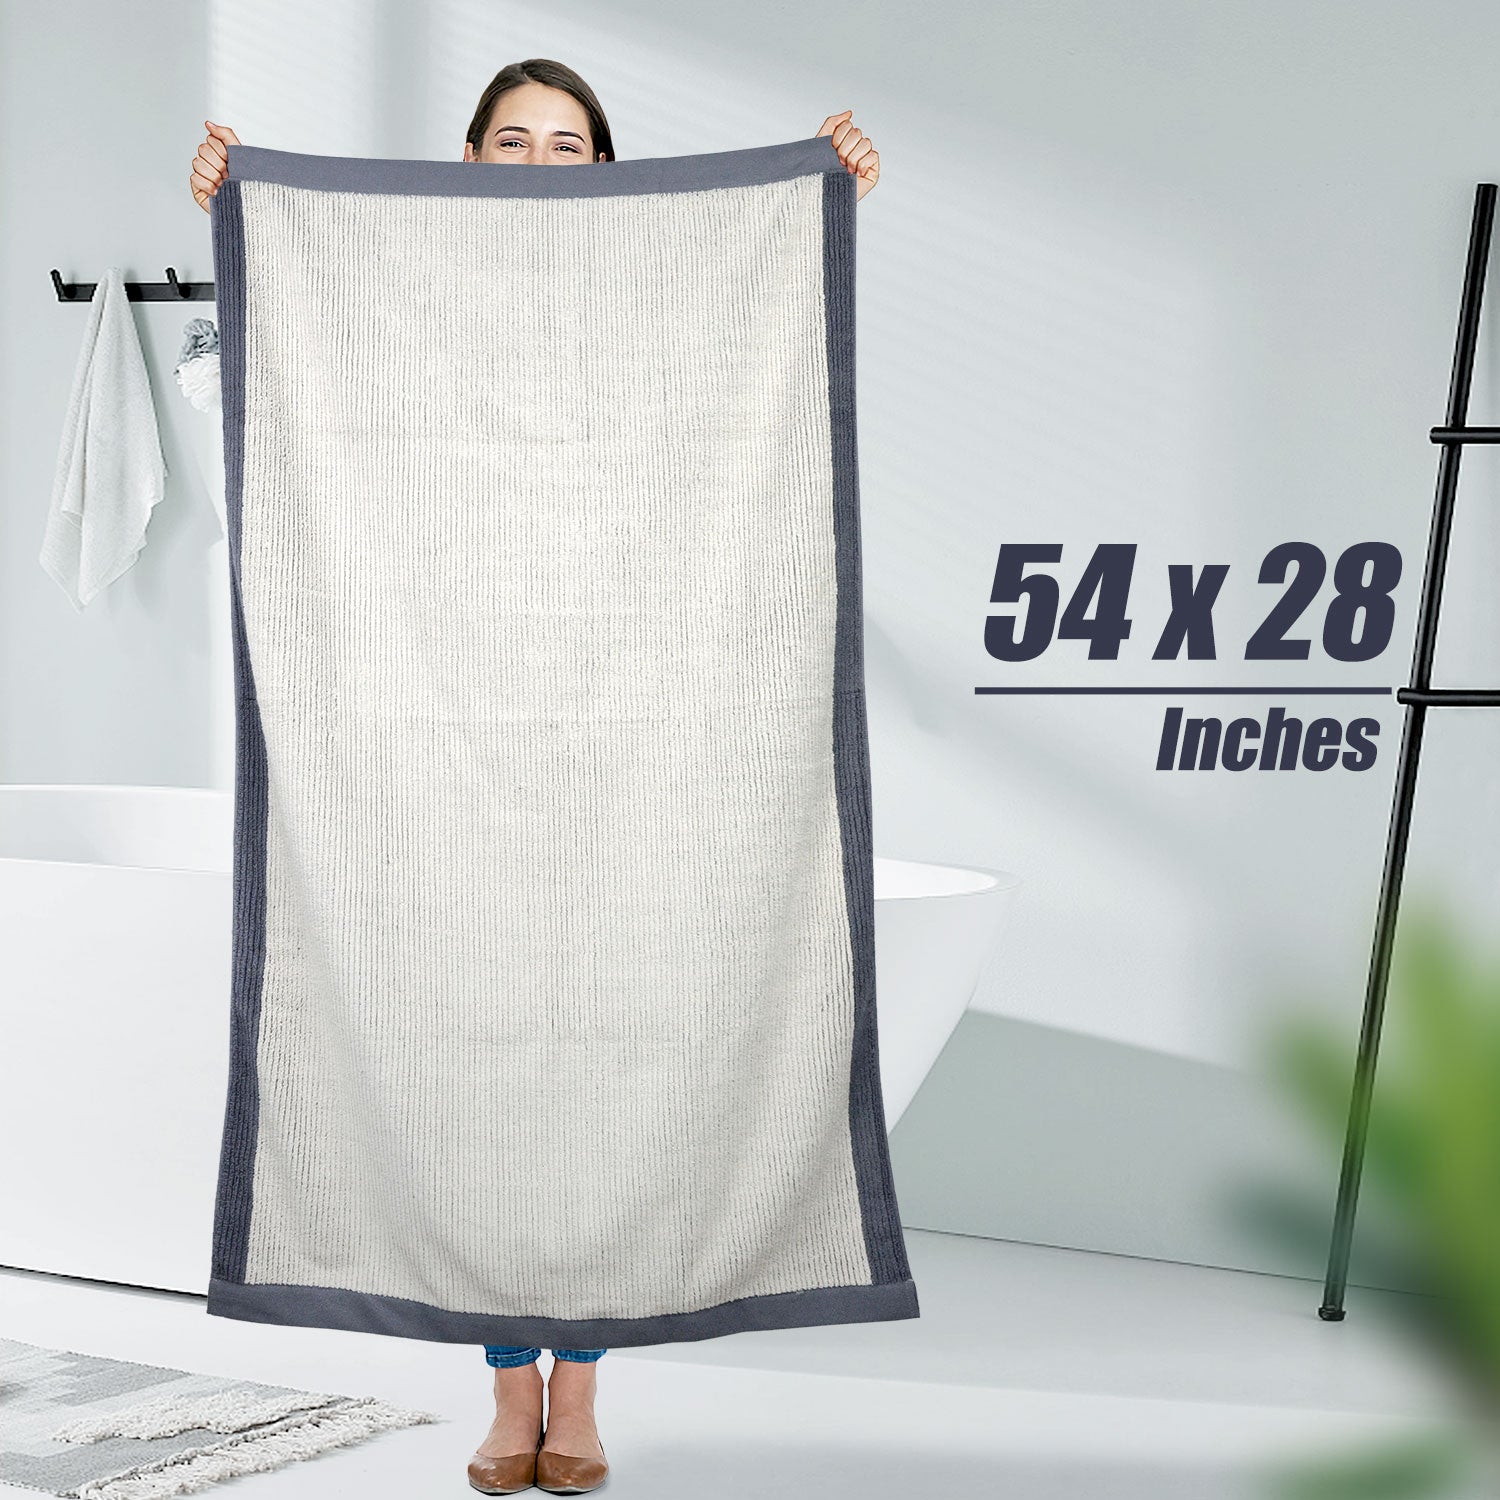 Cleanbear Shower Towel Soft Bath Towels for Bathroom, 2 Cotton Fluffy Towels (520 GSM), 54 x 28 Inches